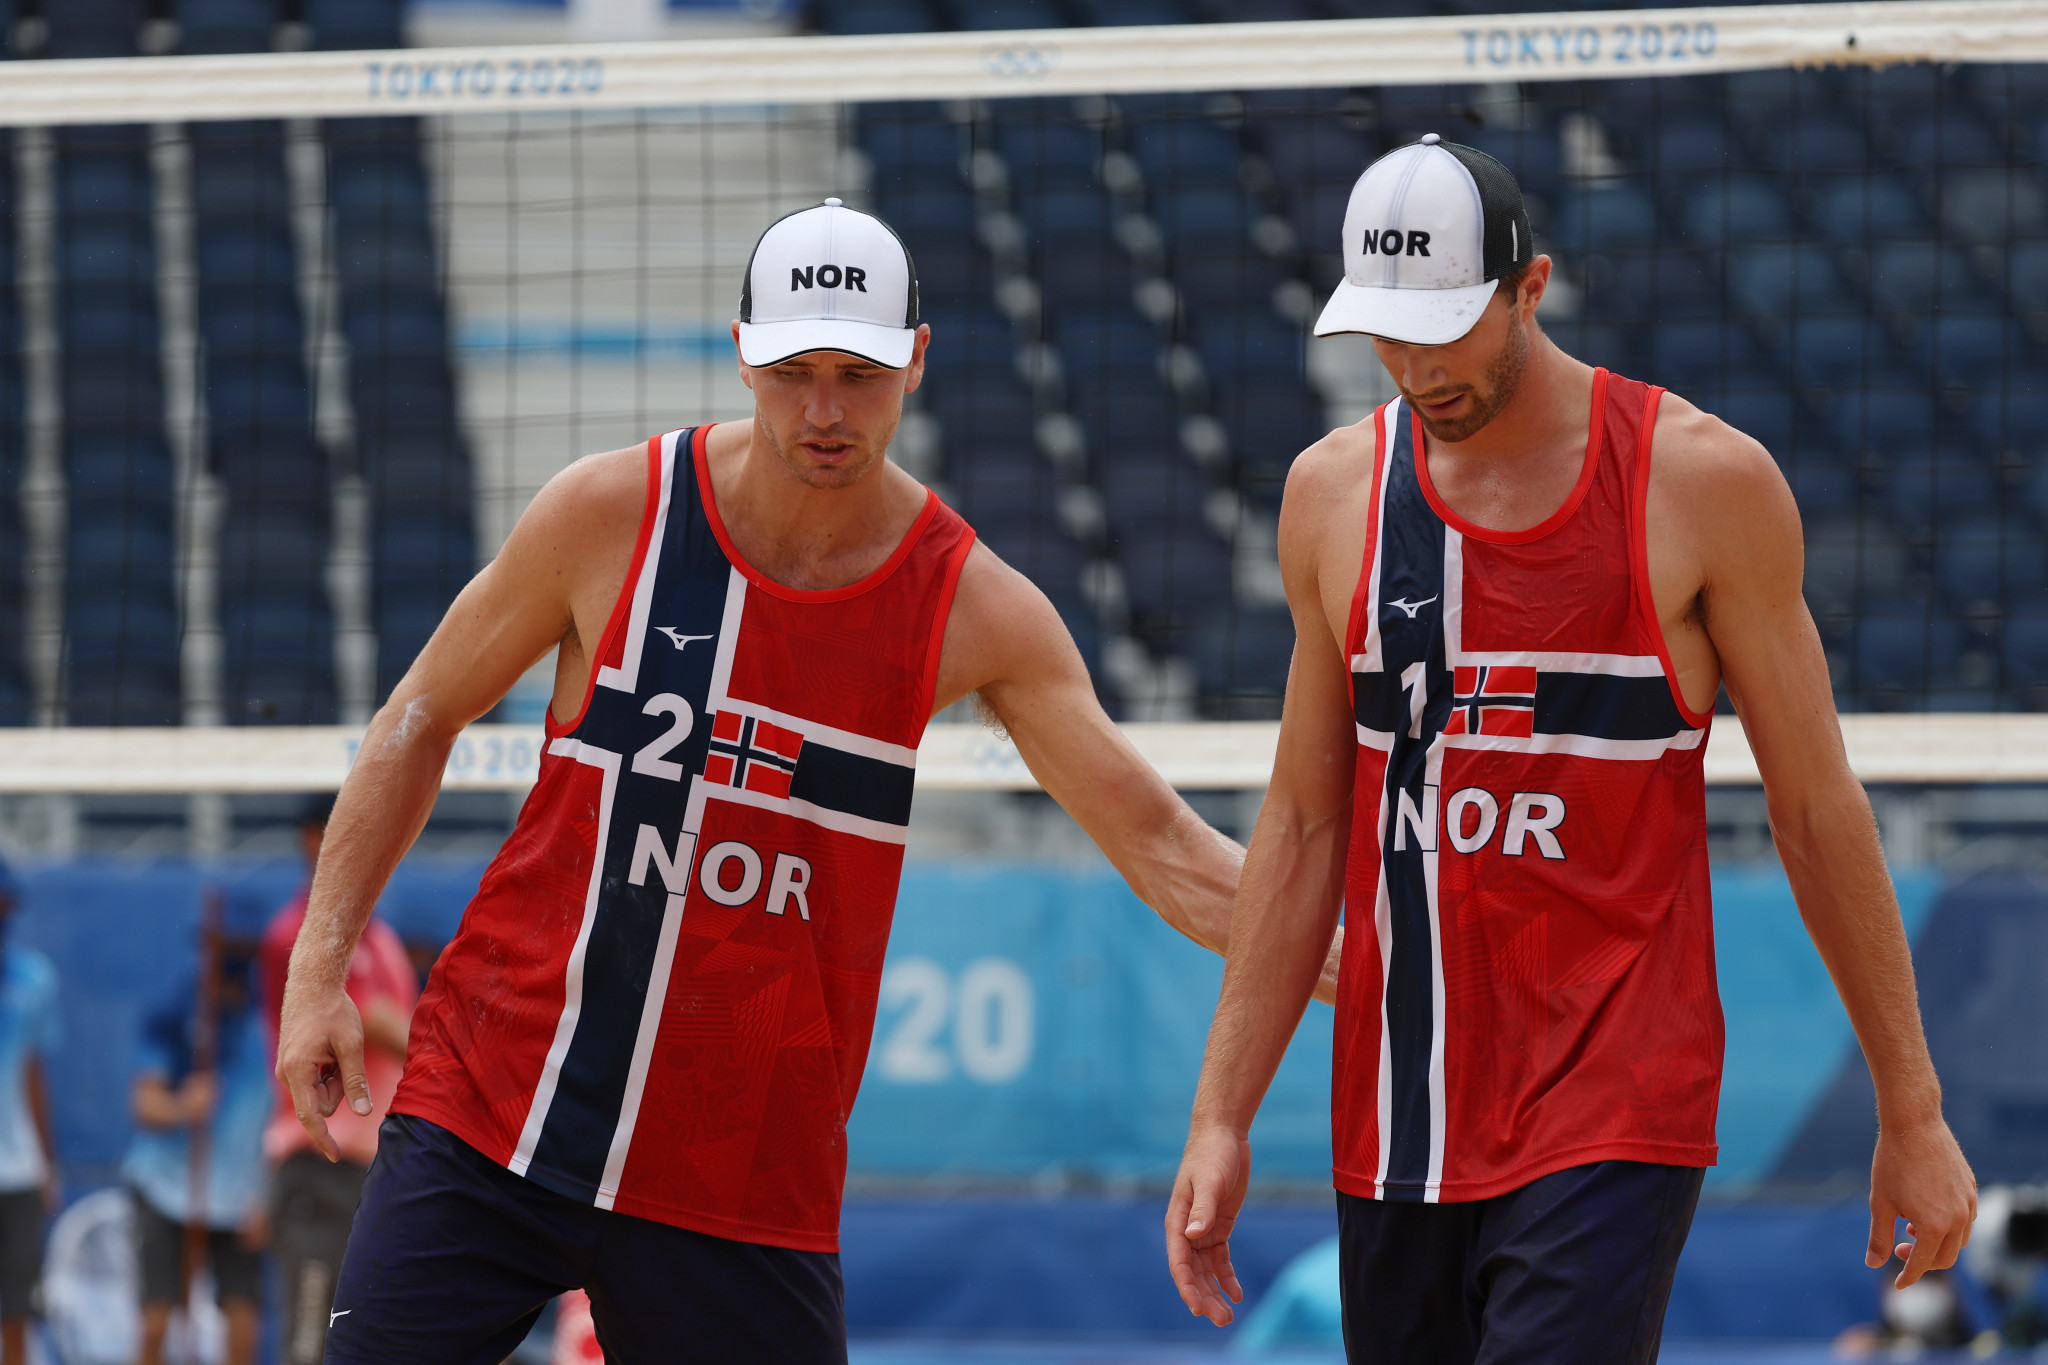 Olympic champions Mol and Sørum to challenge at Beach Volleyball Major Series event in Gstaad